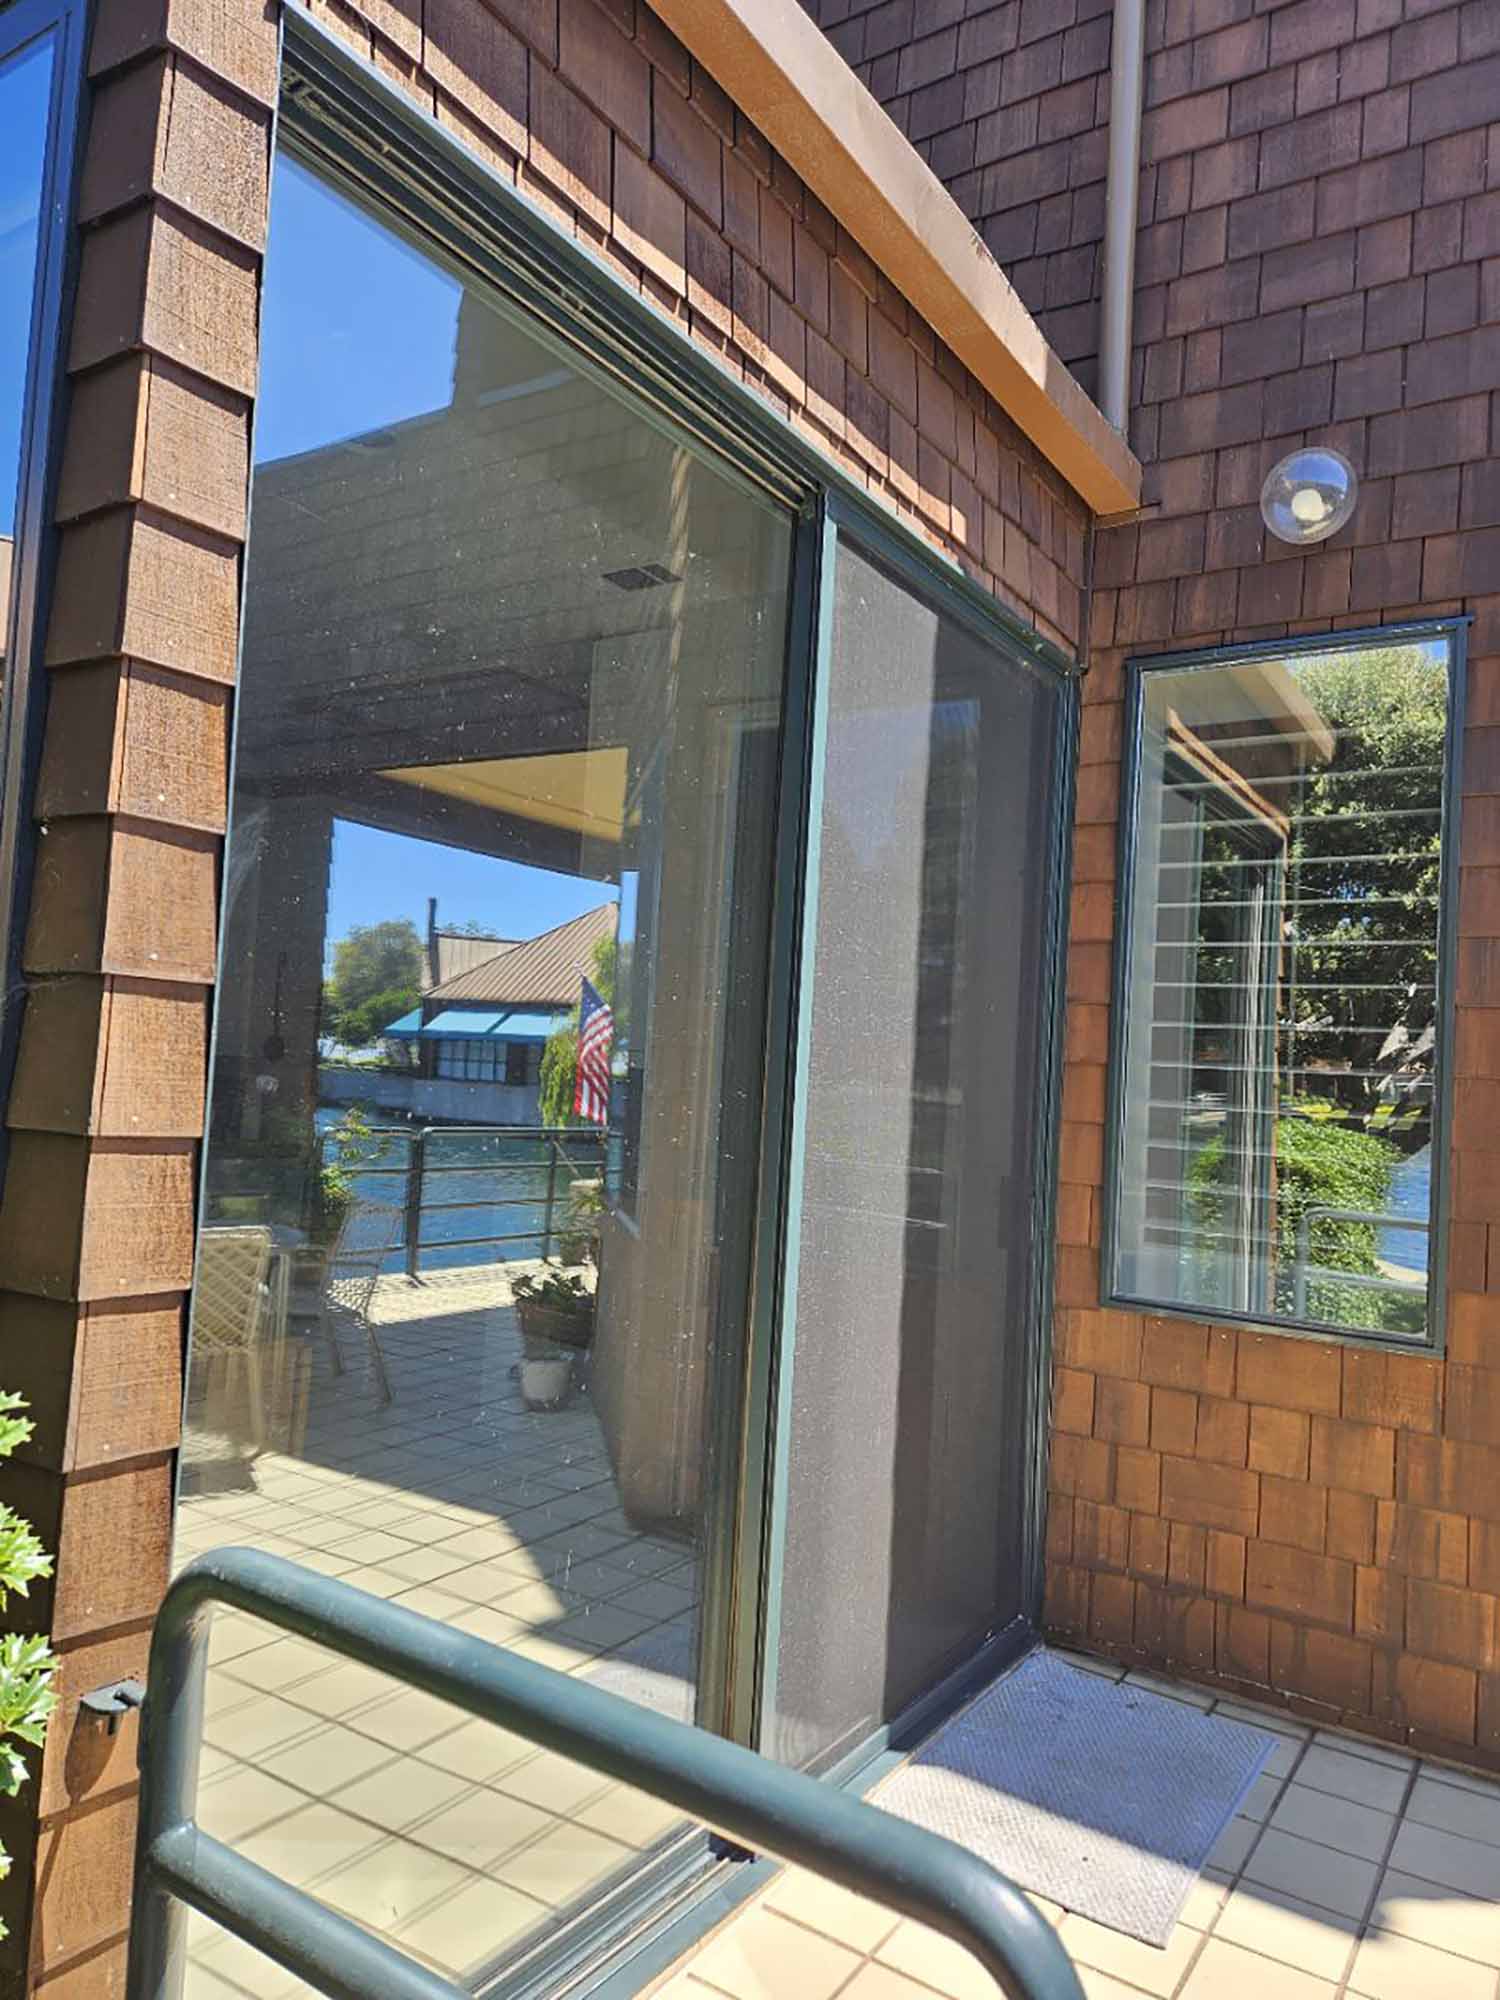 Sun and Heat Control Window Film for Tiburon, CA, installed by ClimatePro.